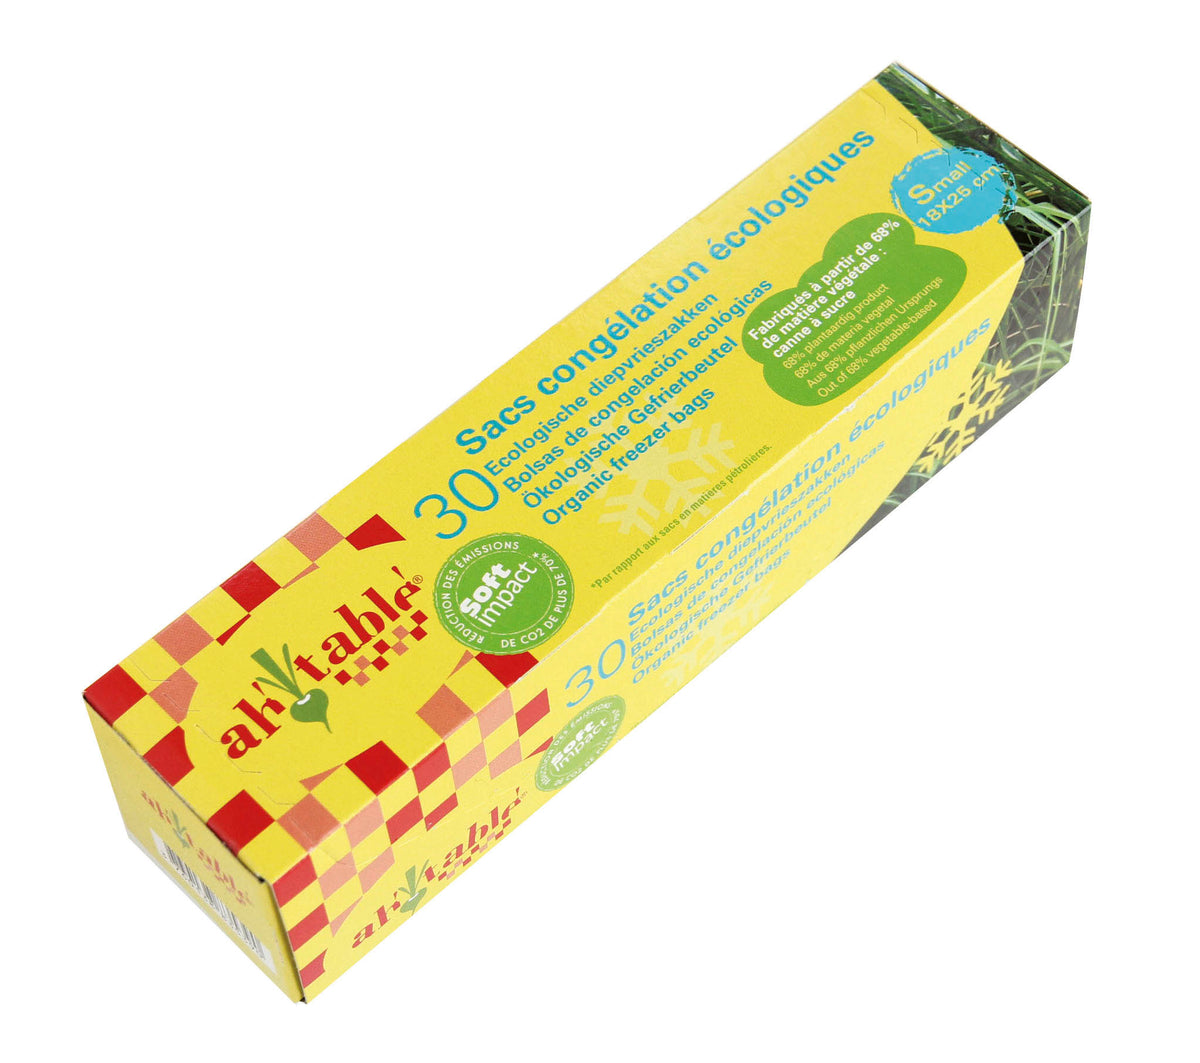 Eco Freezer Bags (Small) | Food Alive | Raw Living UK | House &amp; Home | 30 Small Eco Freezer bags made from polyethylene from sugar cane ethanol produced in Brazil. Supplied with twist ties. 68% Vegetable material.